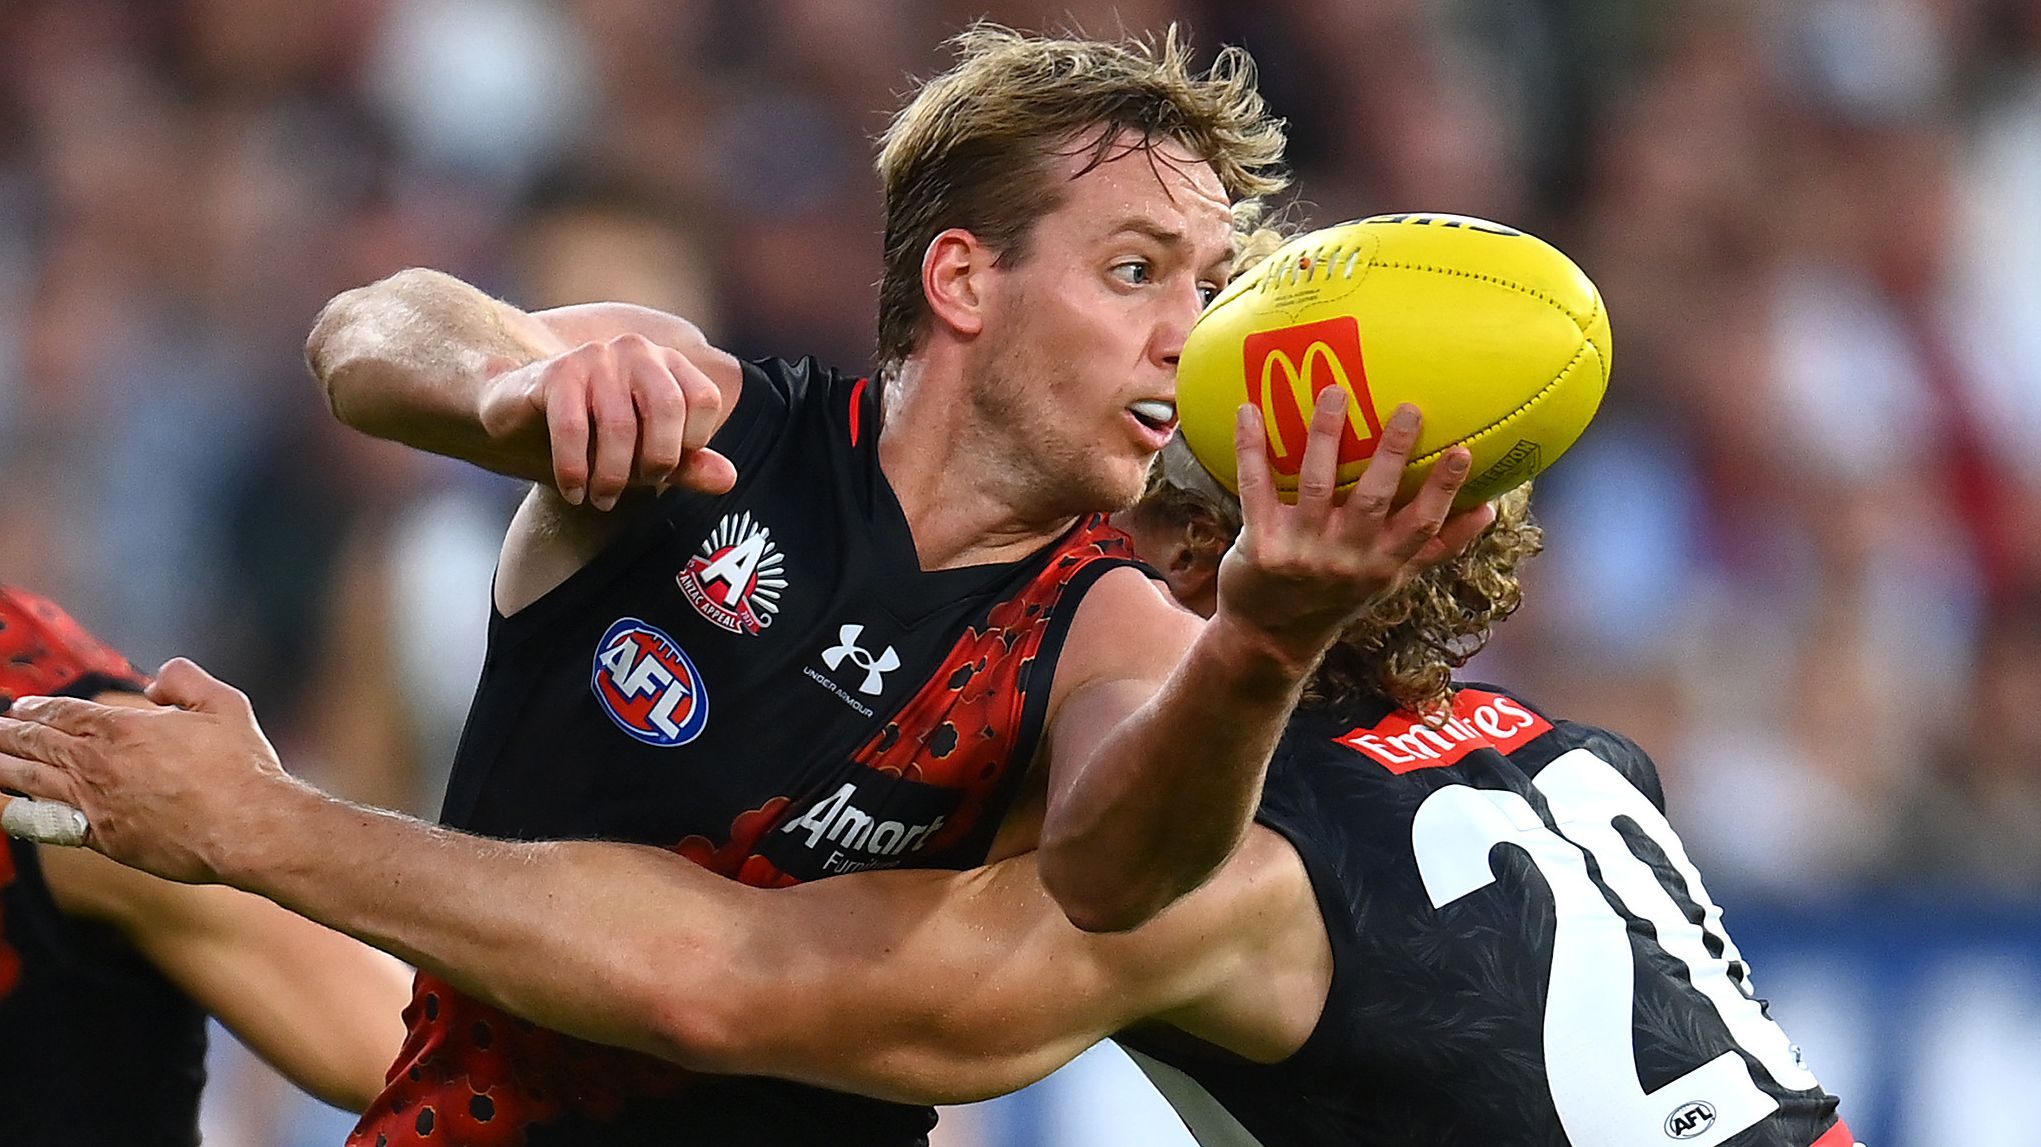 MELBOURNE, AUSTRALIA - APRIL 25: Darcy Parish of the Bombers handballs whilst being tackled by Will Kelly of the Magpies during the round six AFL match between Collingwood Magpies and Essendon Bombers at Melbourne Cricket Ground, on April 25, 2023, in Melbourne, Australia. (Photo by Quinn Rooney/Getty Images)